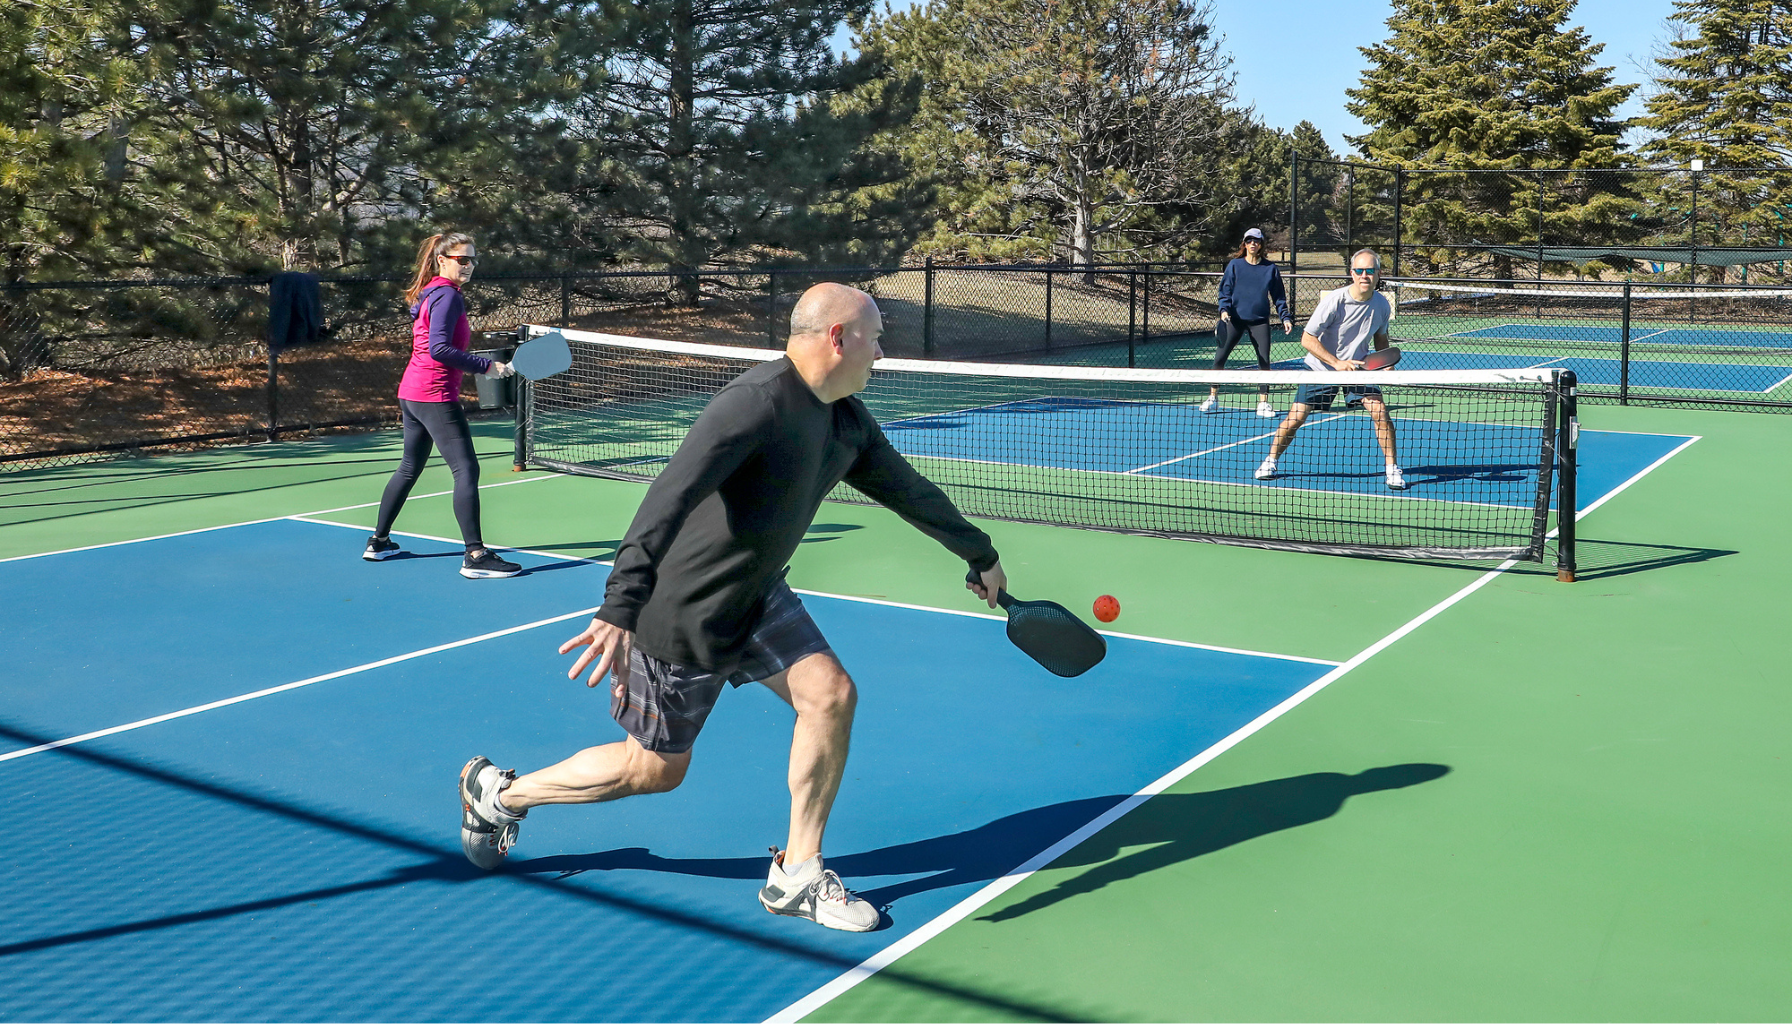 Doubles pickleball players in a dynamic rally, demonstrating teamwork and skillful exchanges on the court.